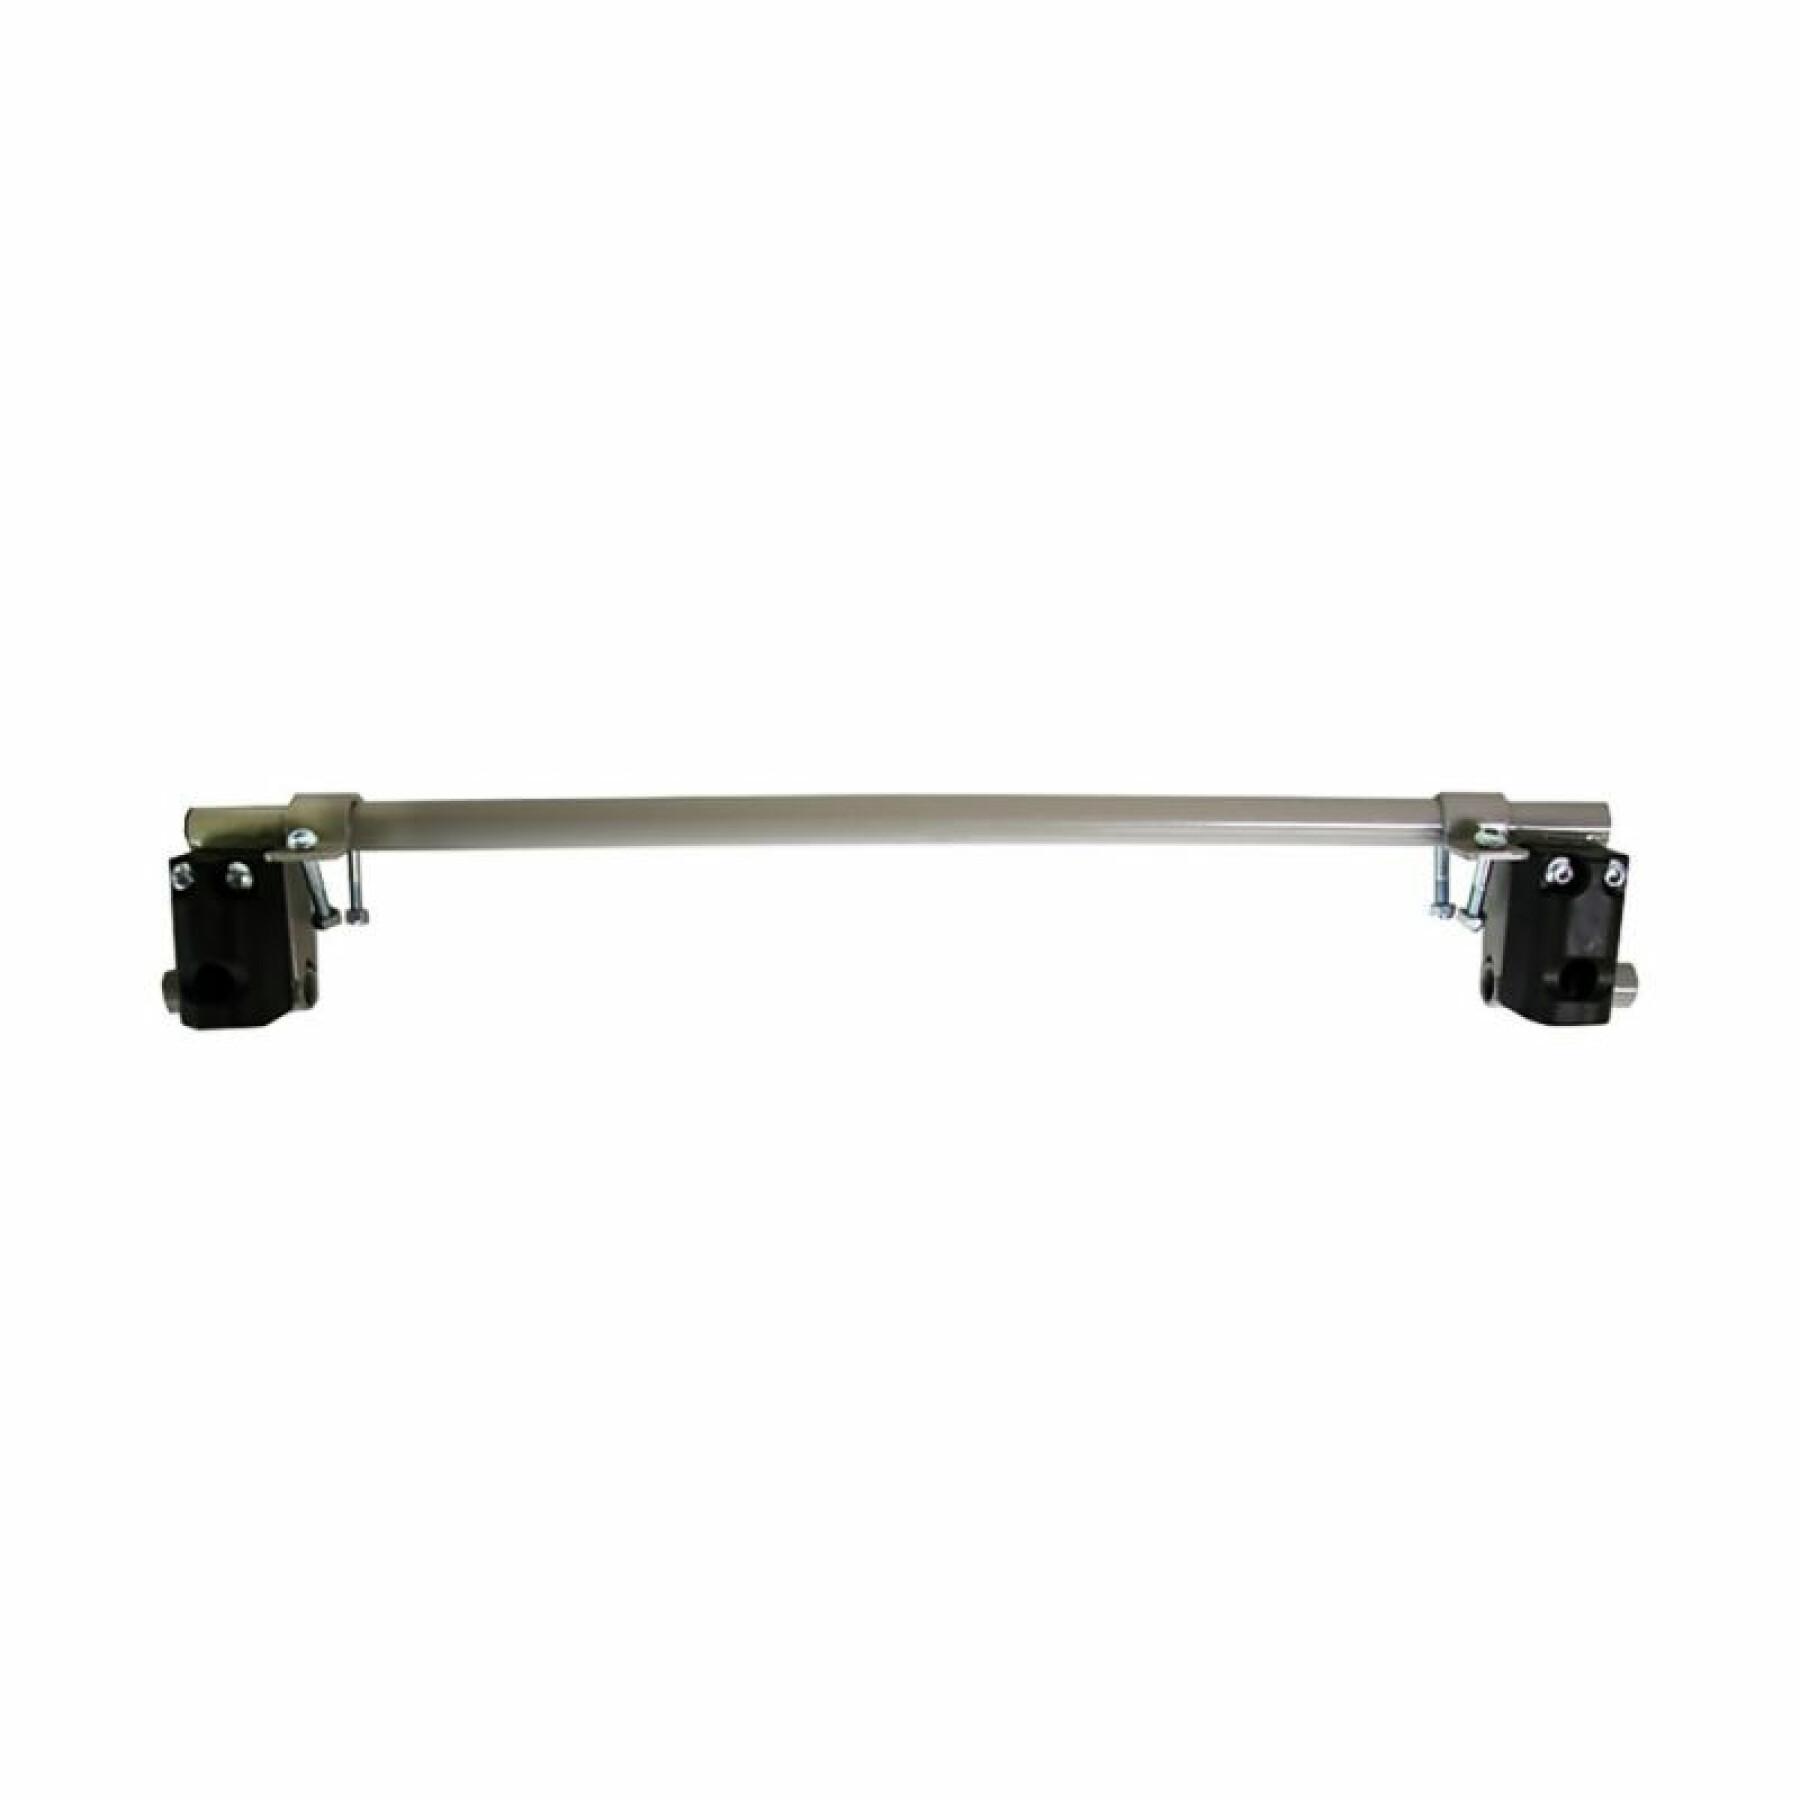 Axle for tail wagon/rover Burley (2008)